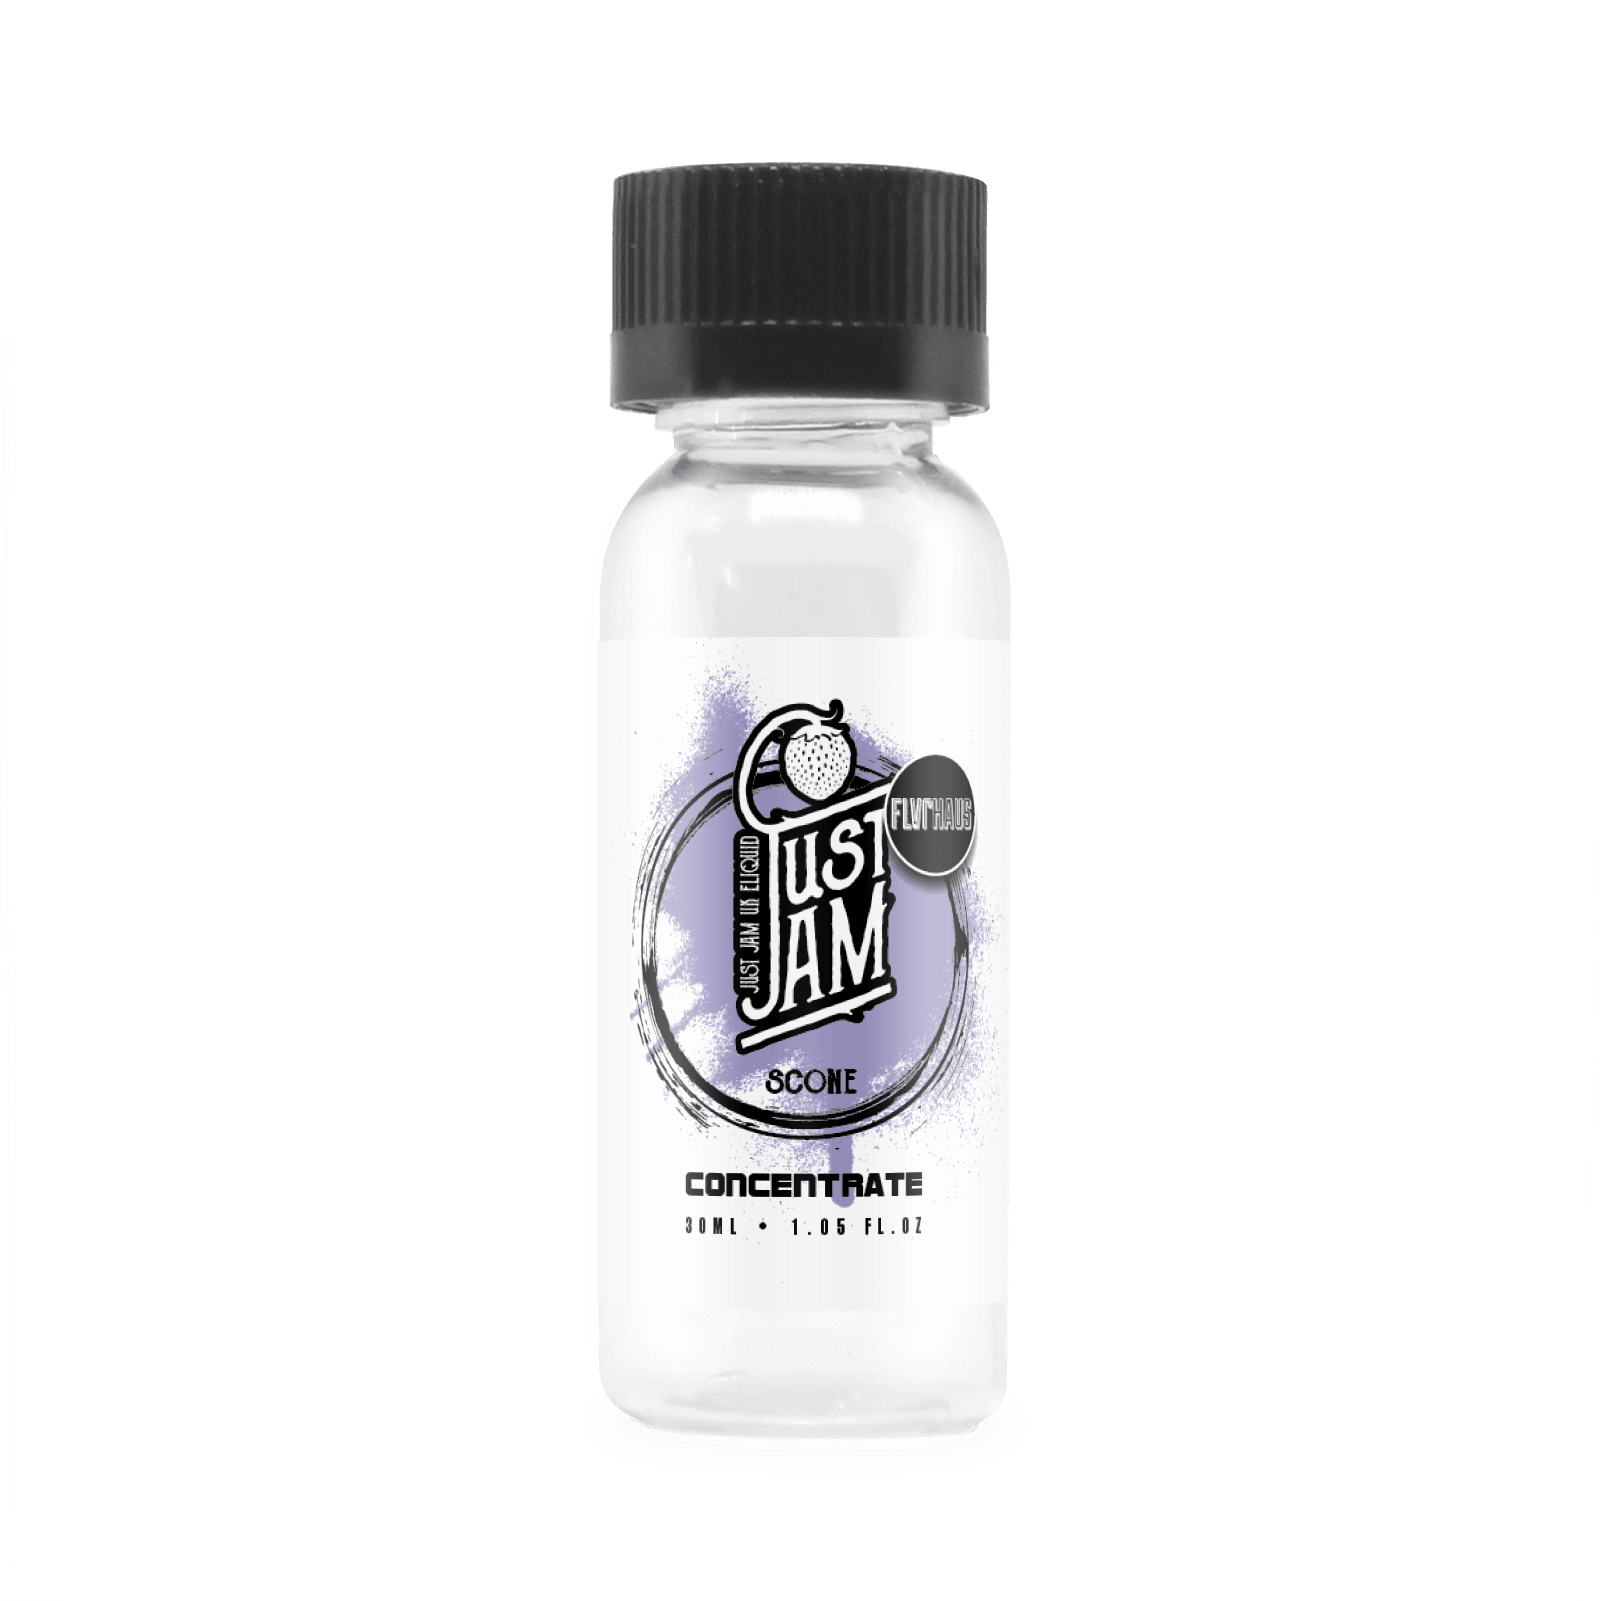 Just Jam - Raspberry Scone Concentrate 30ml - The Ace Of Vapez